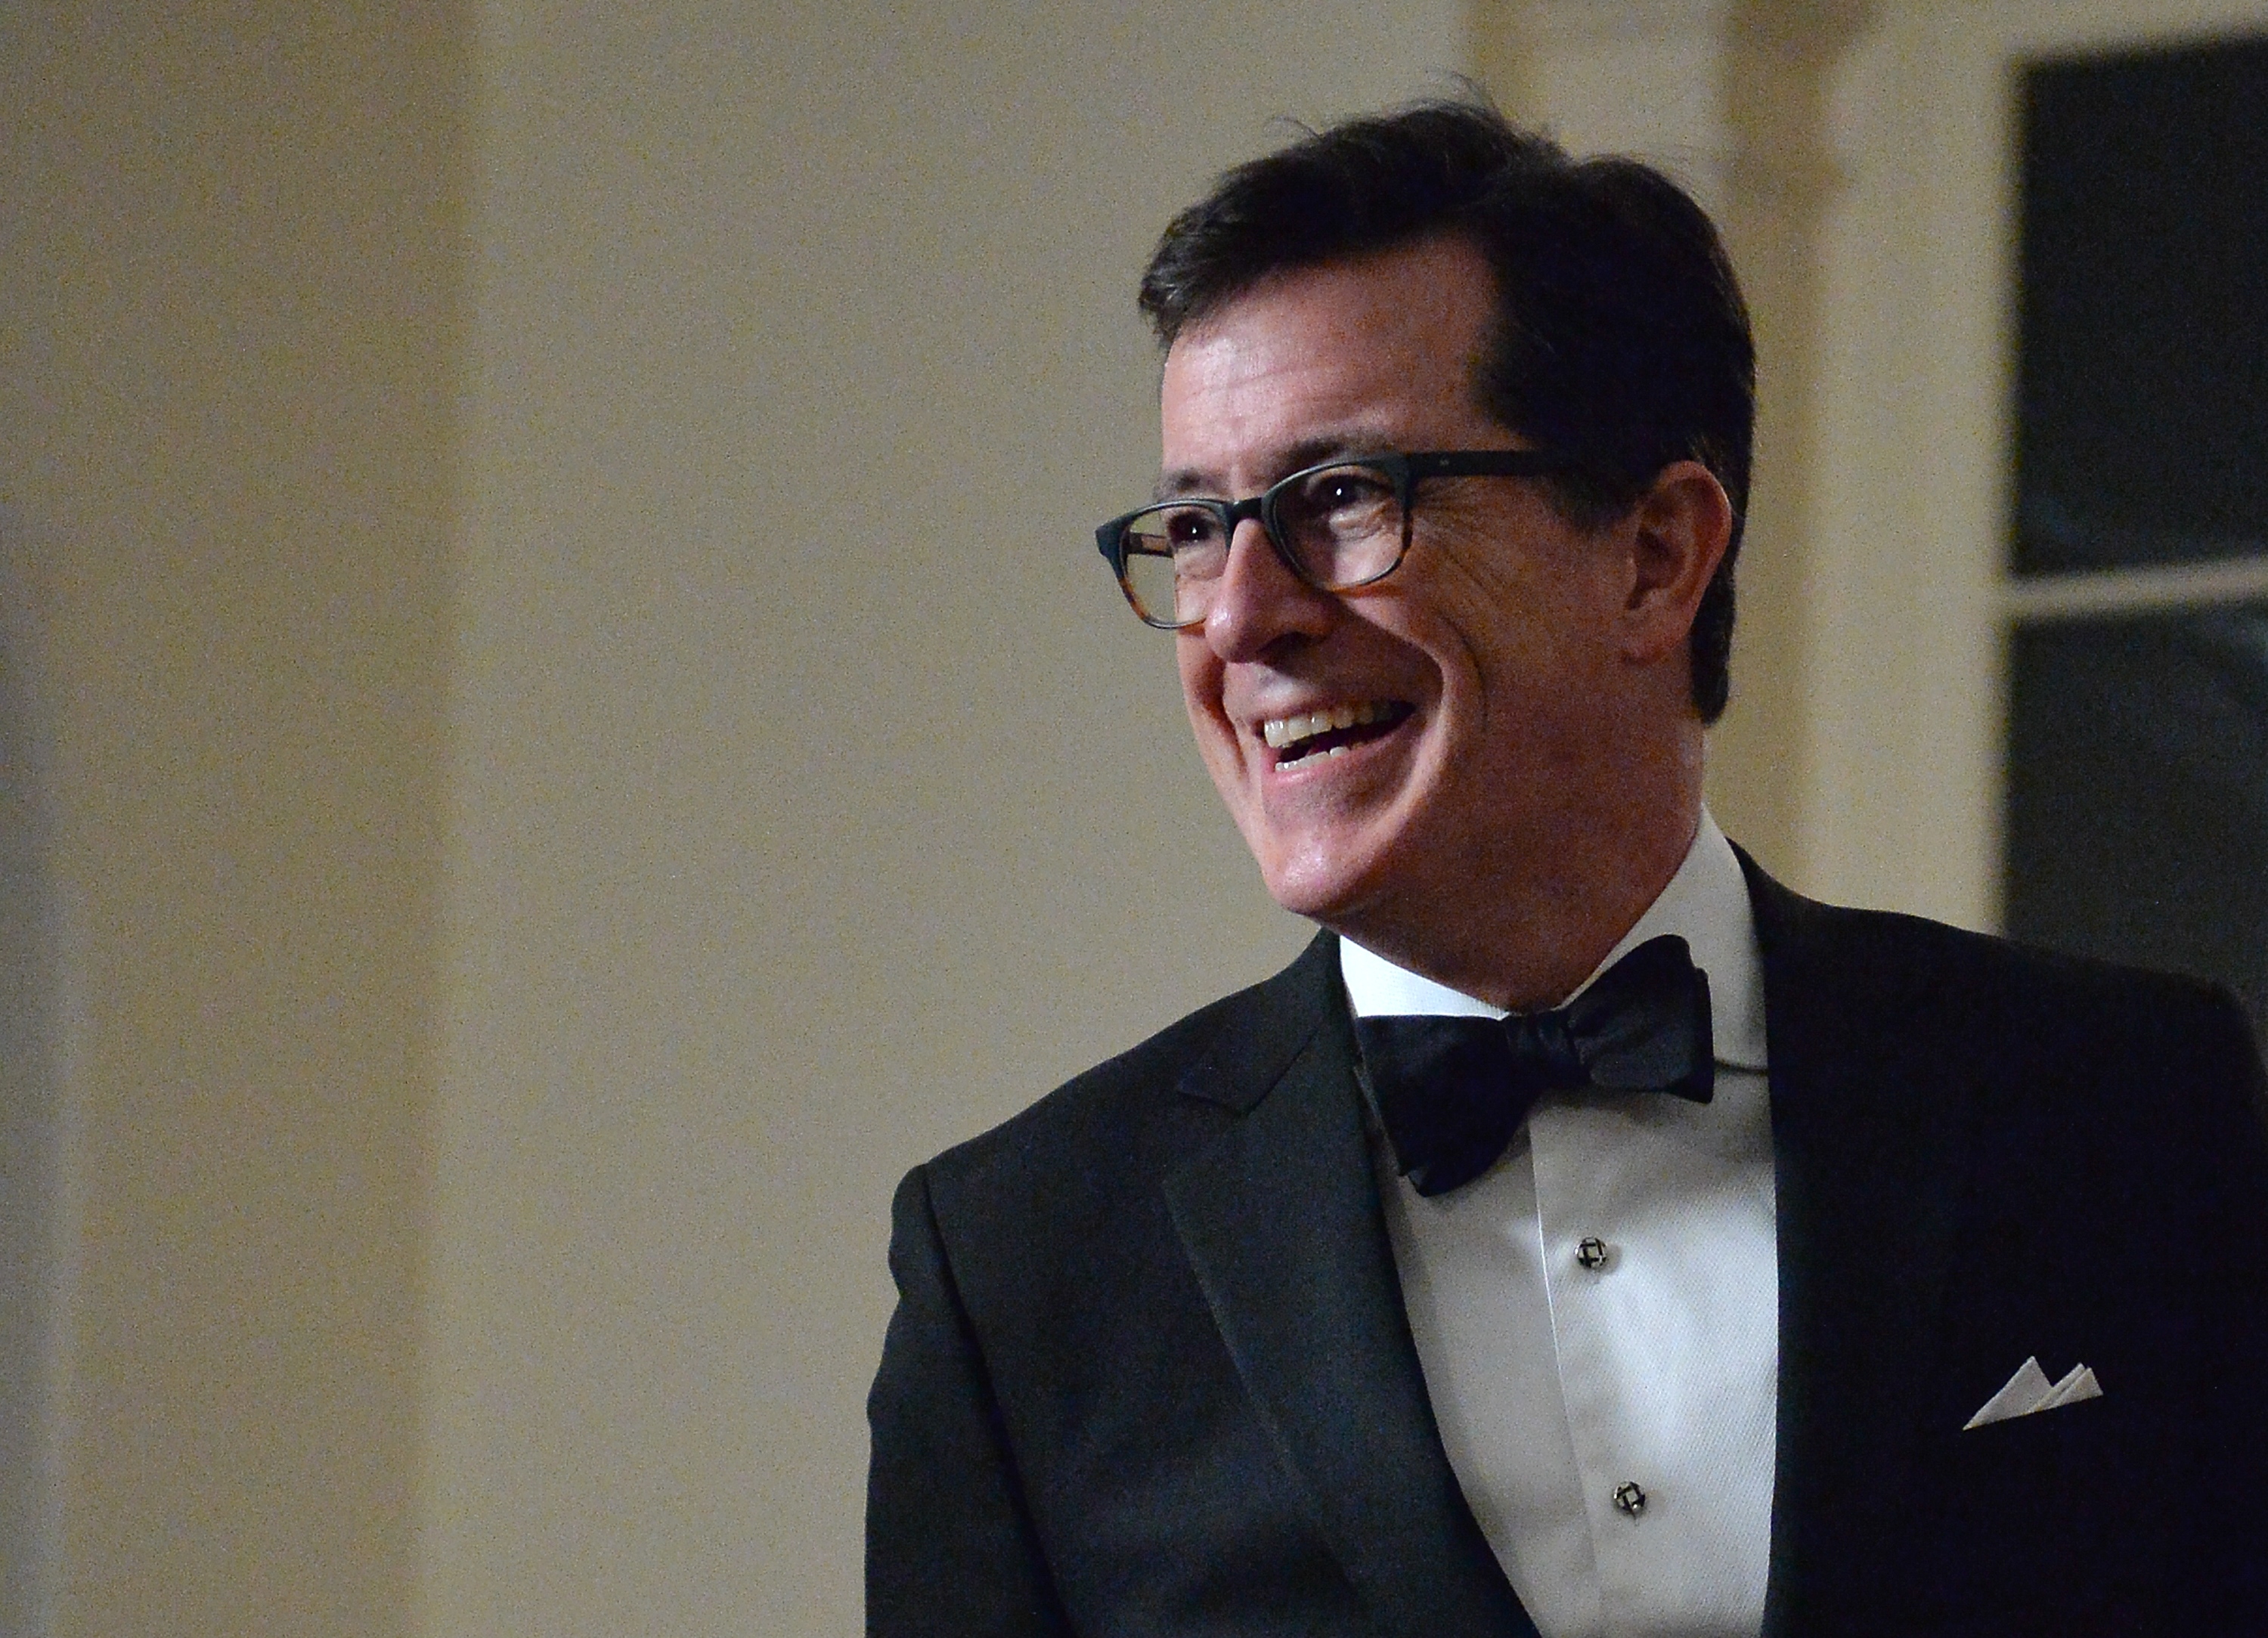 Stephen Colbert arrives at the White House in Washington on Feb. 11, 2014 for the state dinner in honor of French President Francois Hollande. (Nicholas Kamm—AFP/Getty Images)